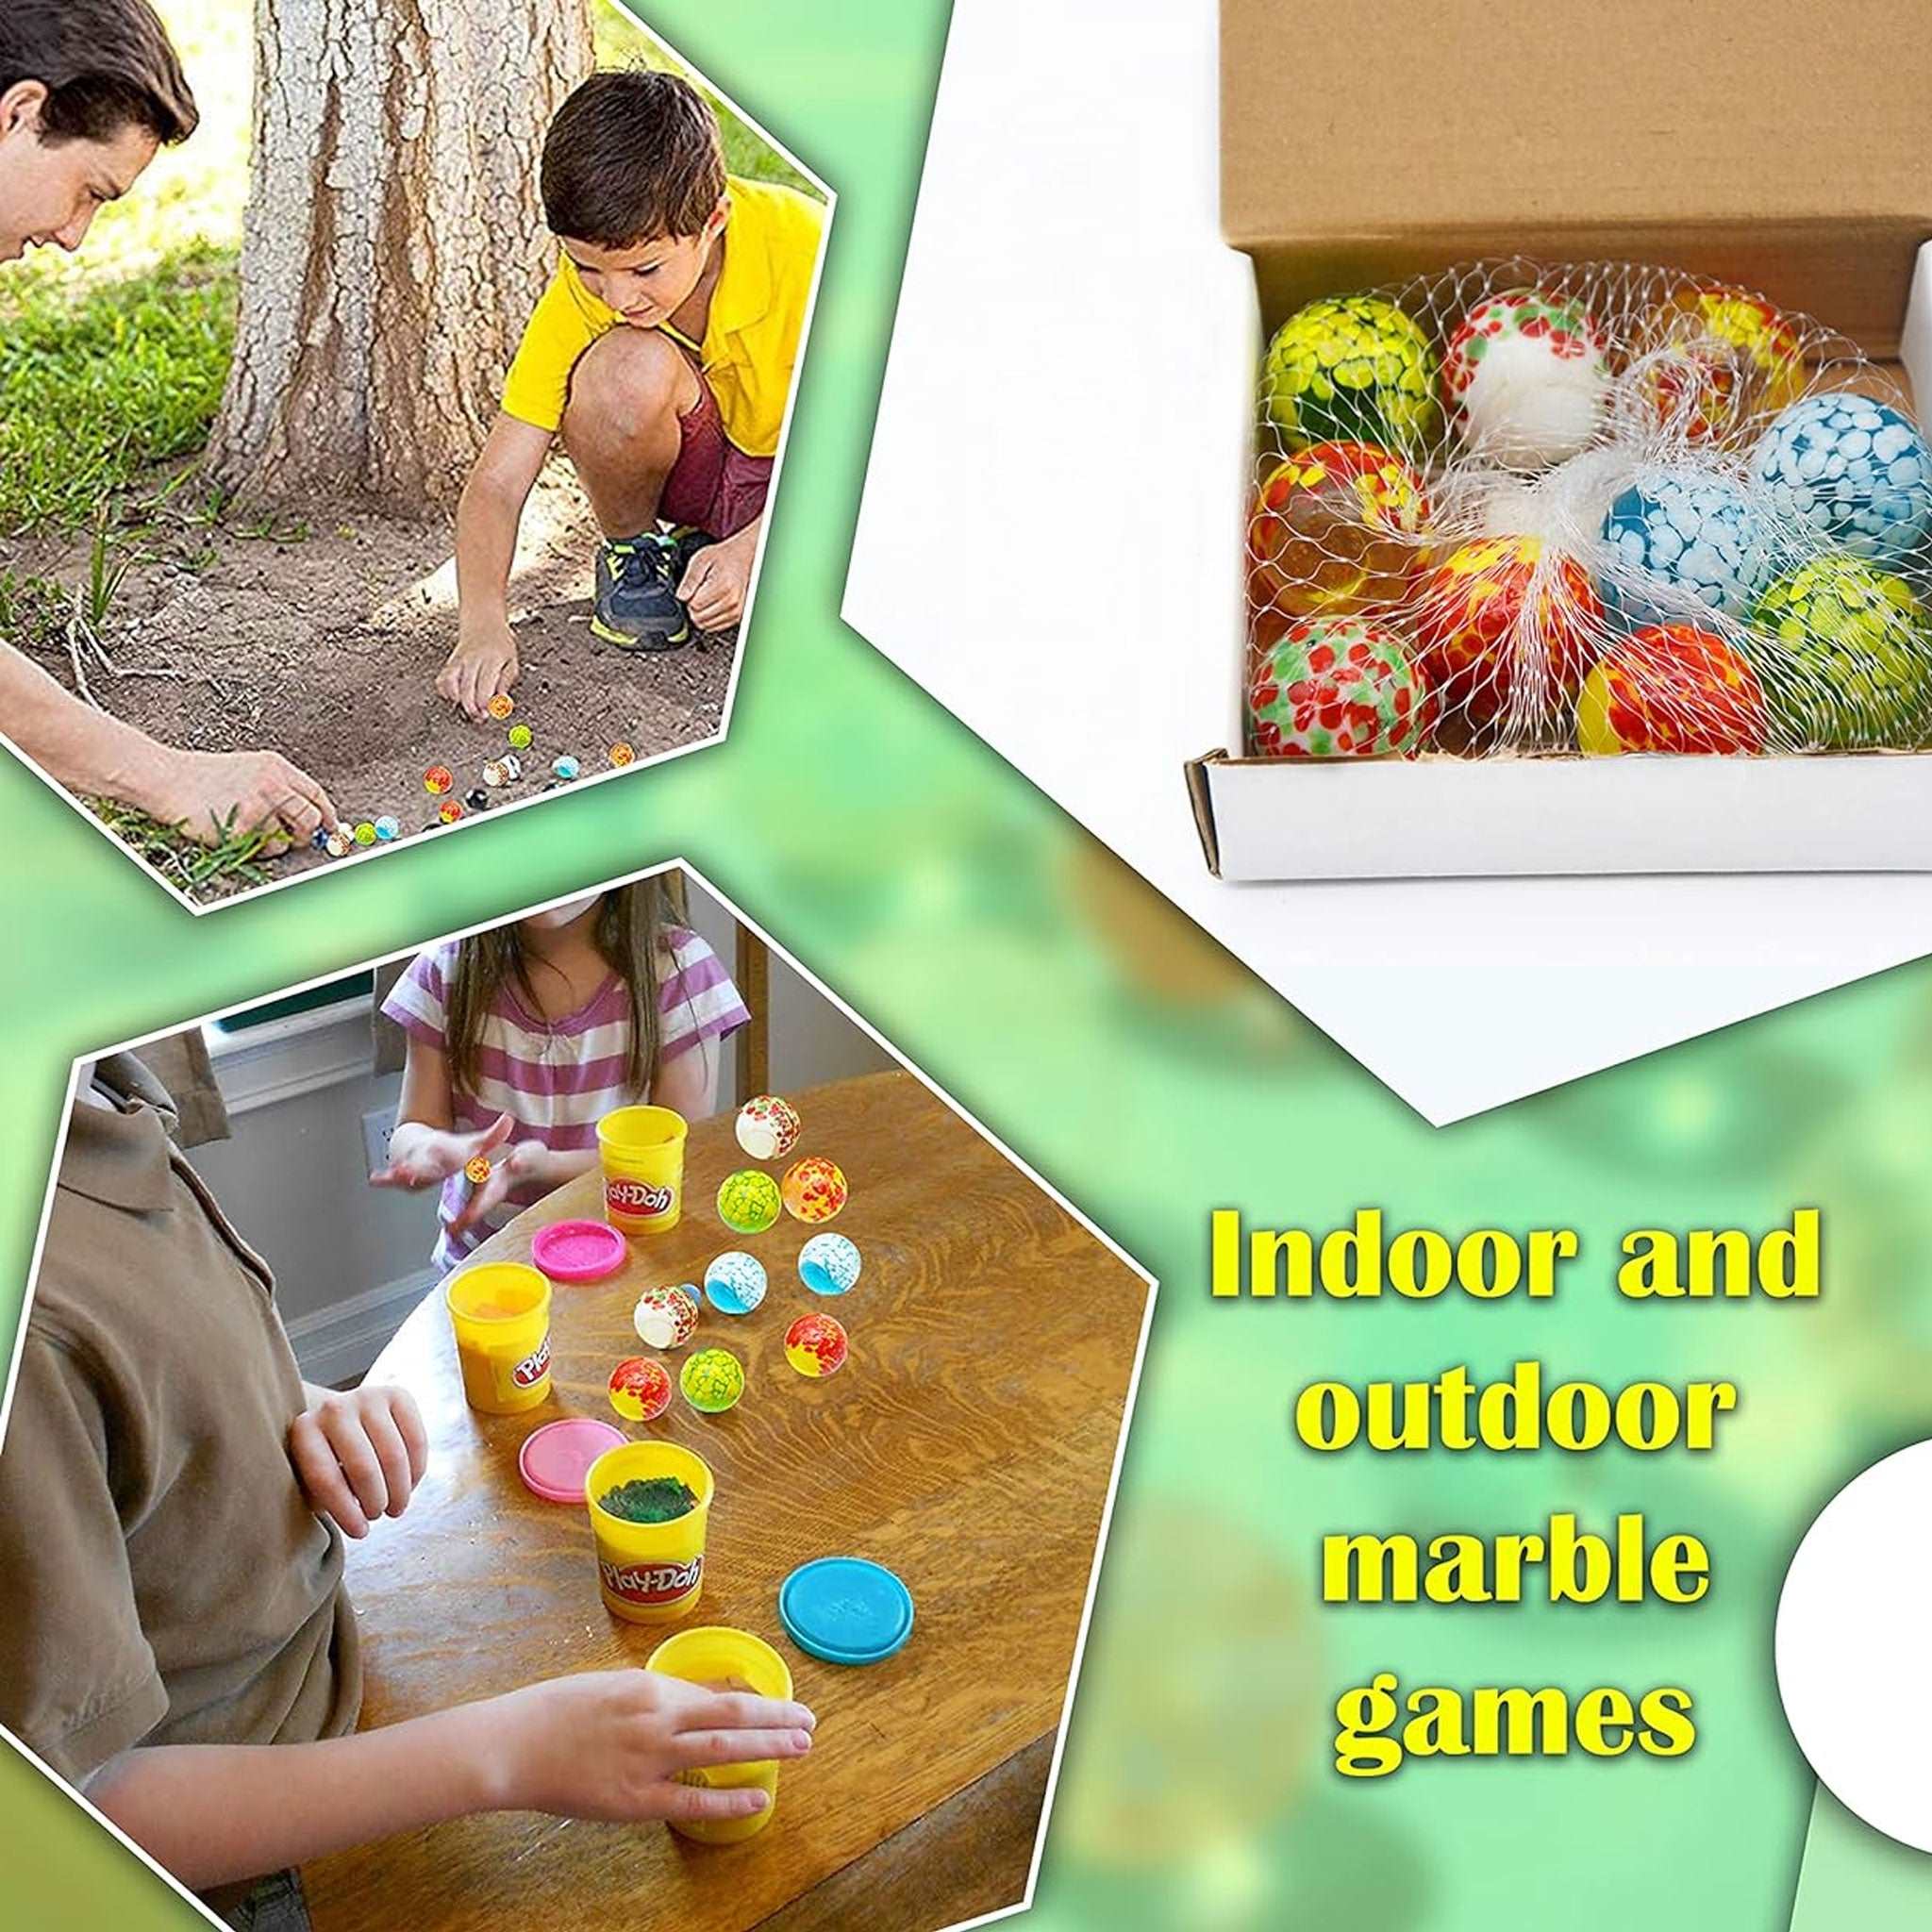 10Pcs Doted Marbles - Glass Marbles, Assorted Cat's Eye Marbles, Games for Kids